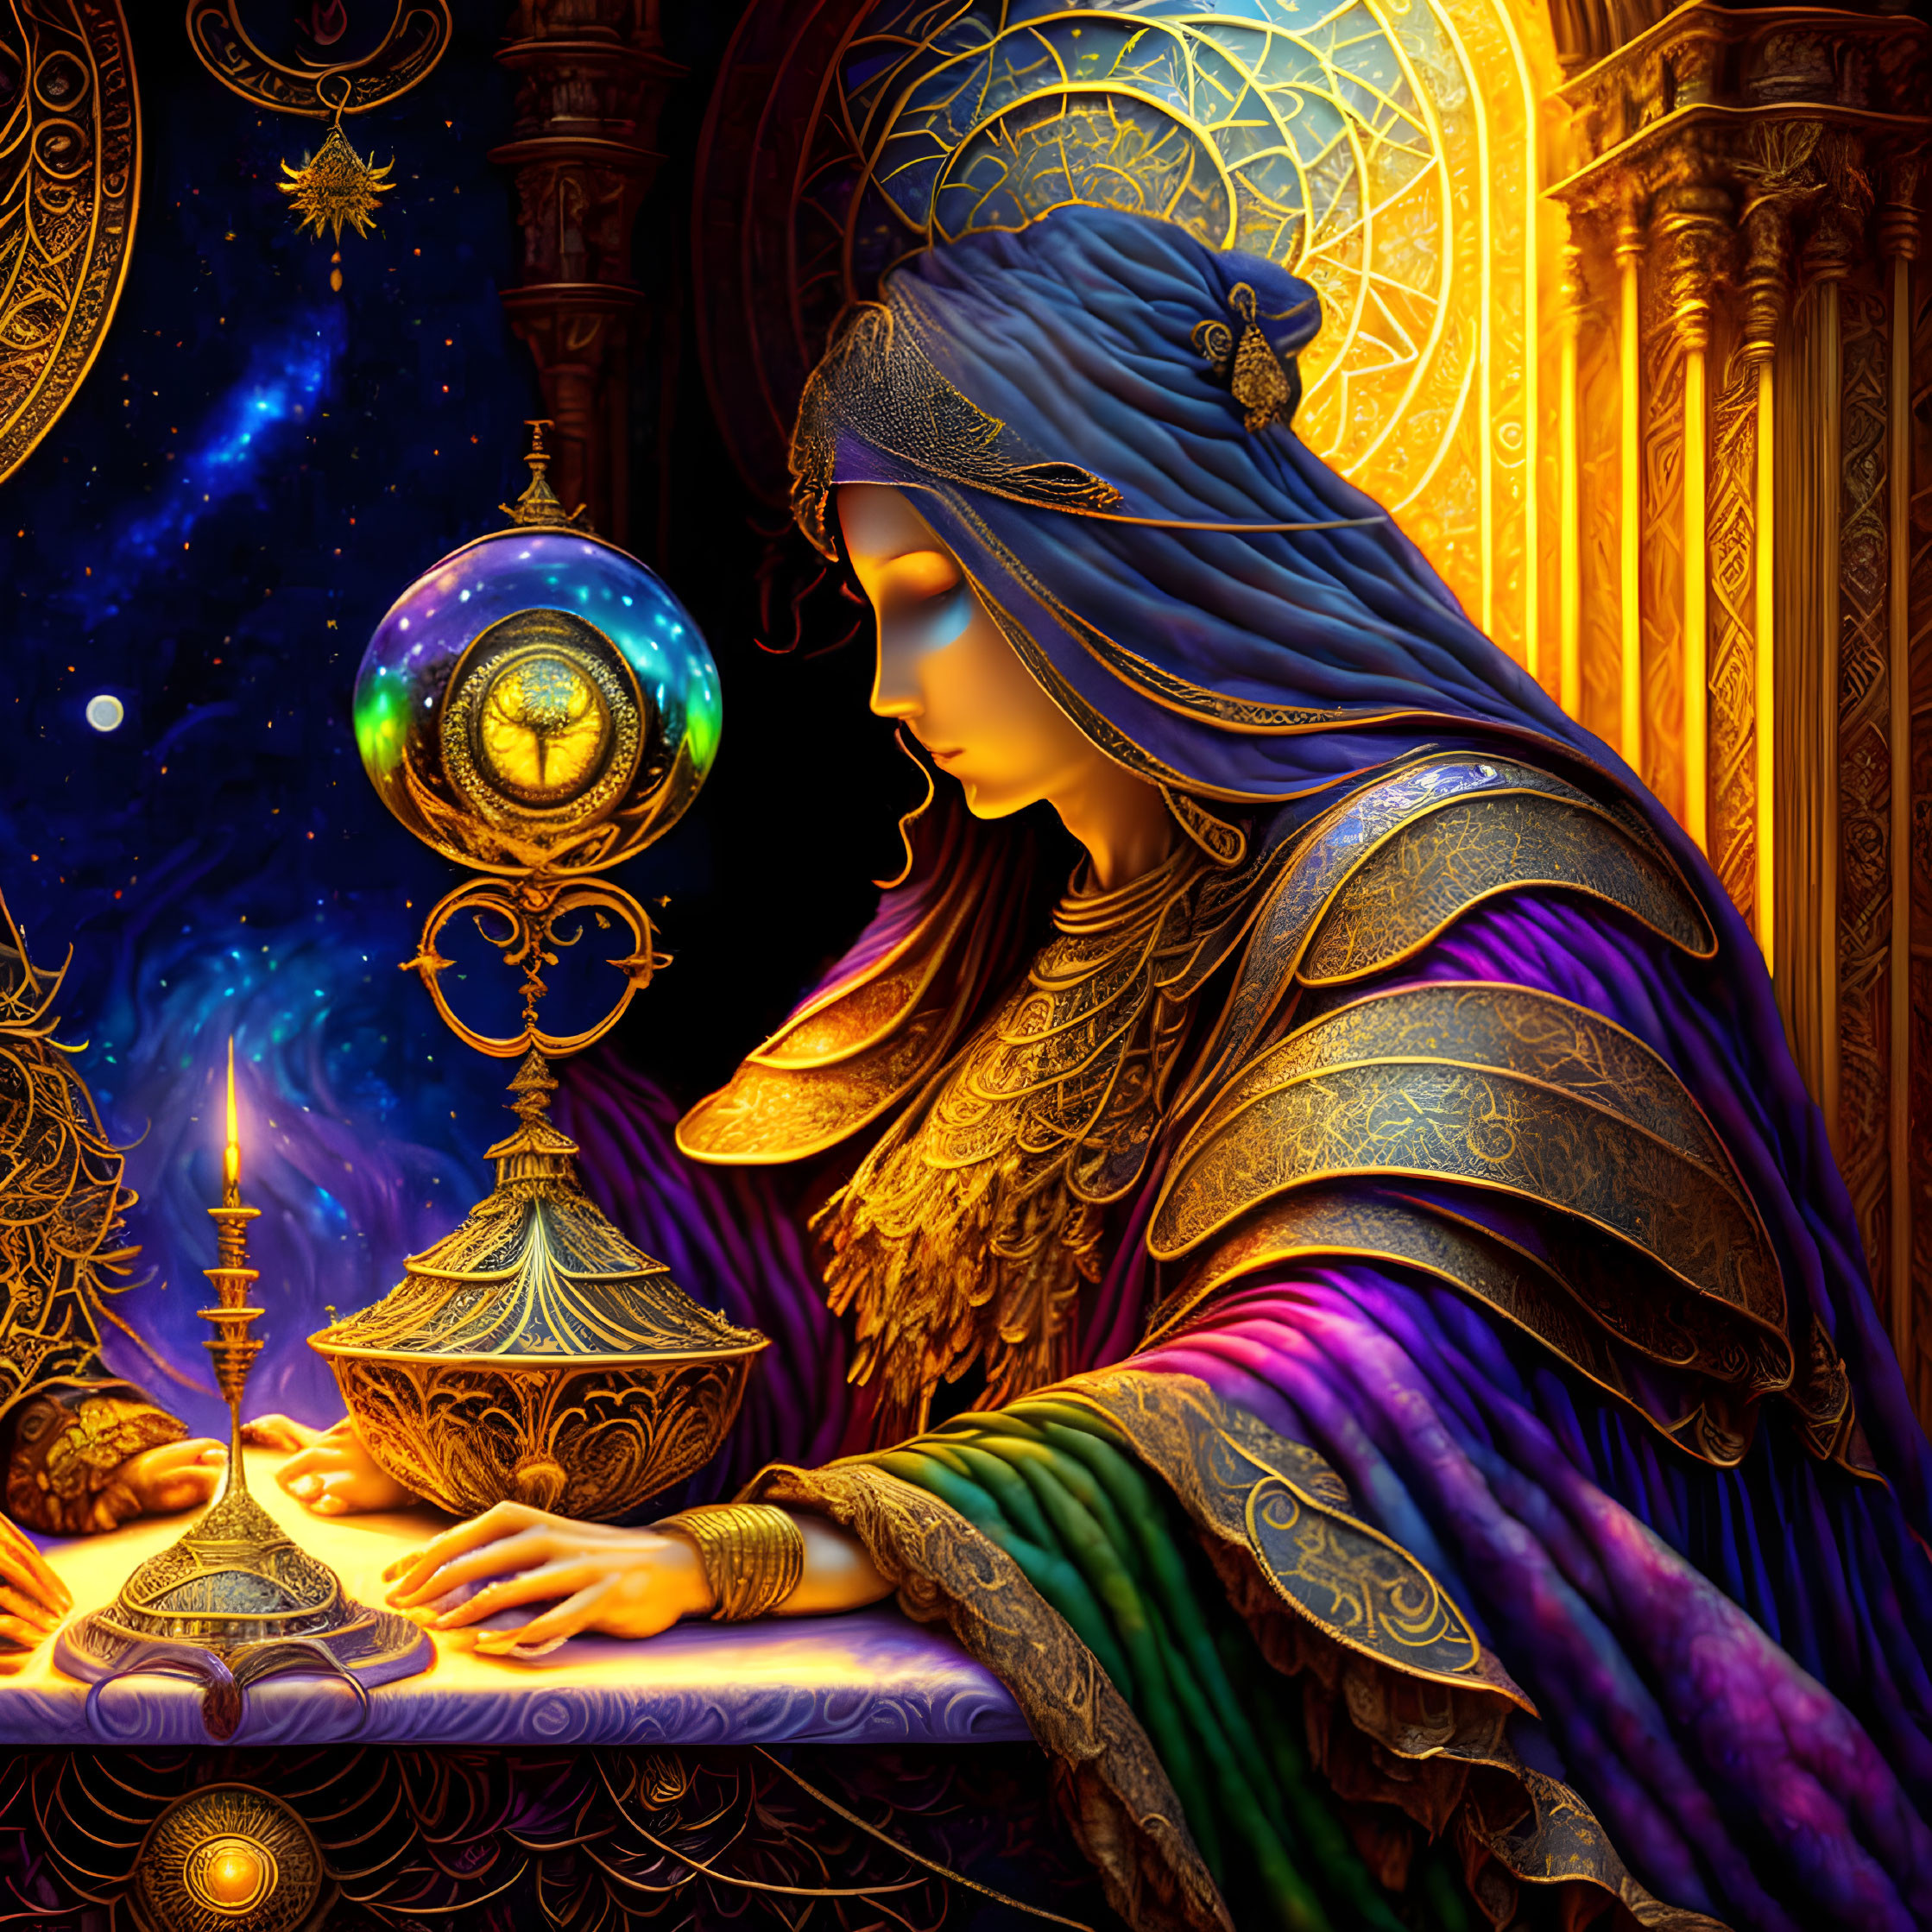 Mystical sorceress with starry backdrop and glowing orb among golden artifacts